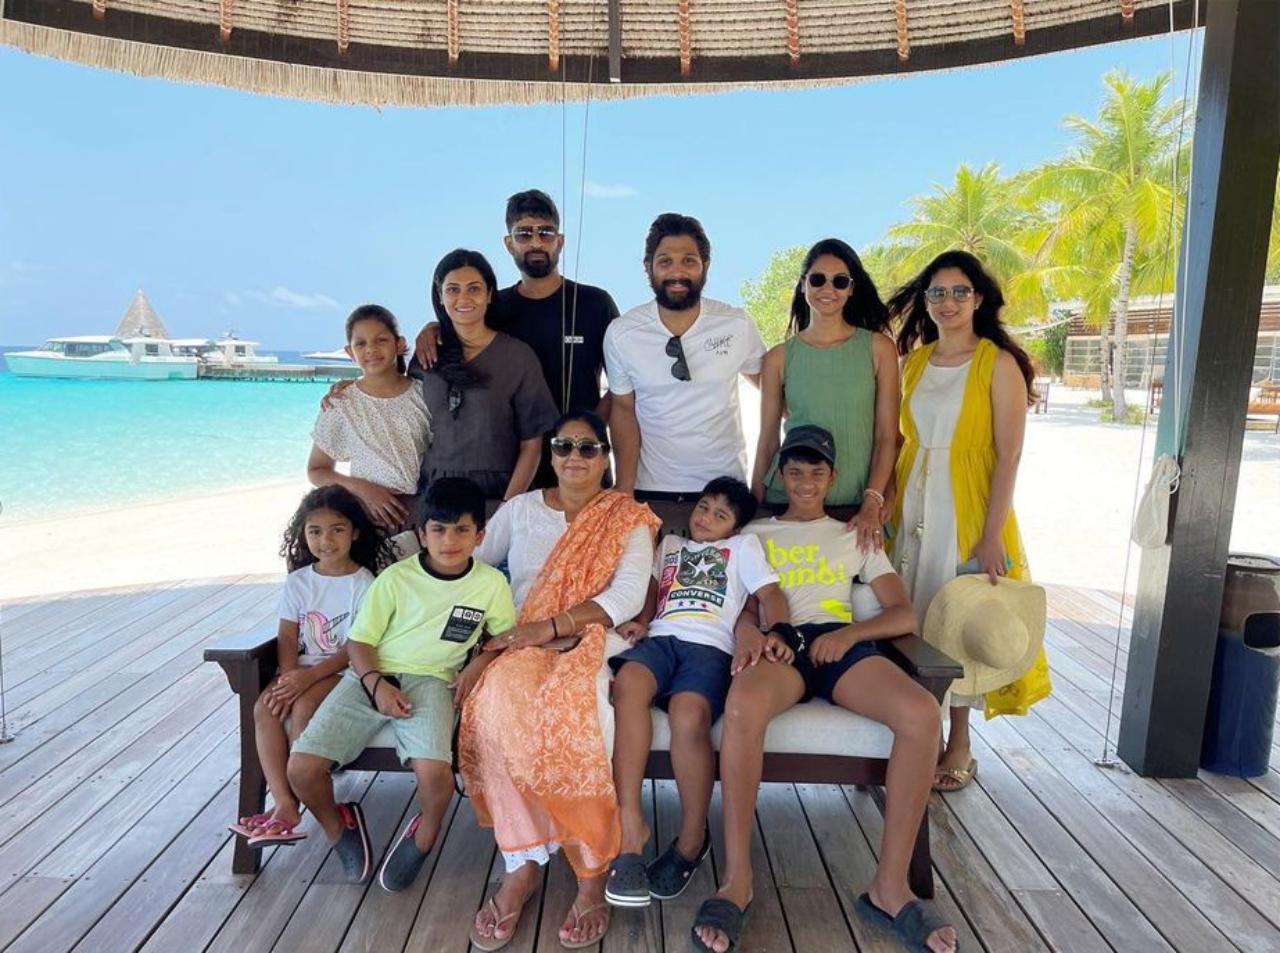 Plans family vacations
Allu Arjun loves traveling with his family and indulging them on exotic holidays. Here’s a look at the superstar’s family vacation in the Maldives.
He had recently visited Rajasthan with his wife and kids